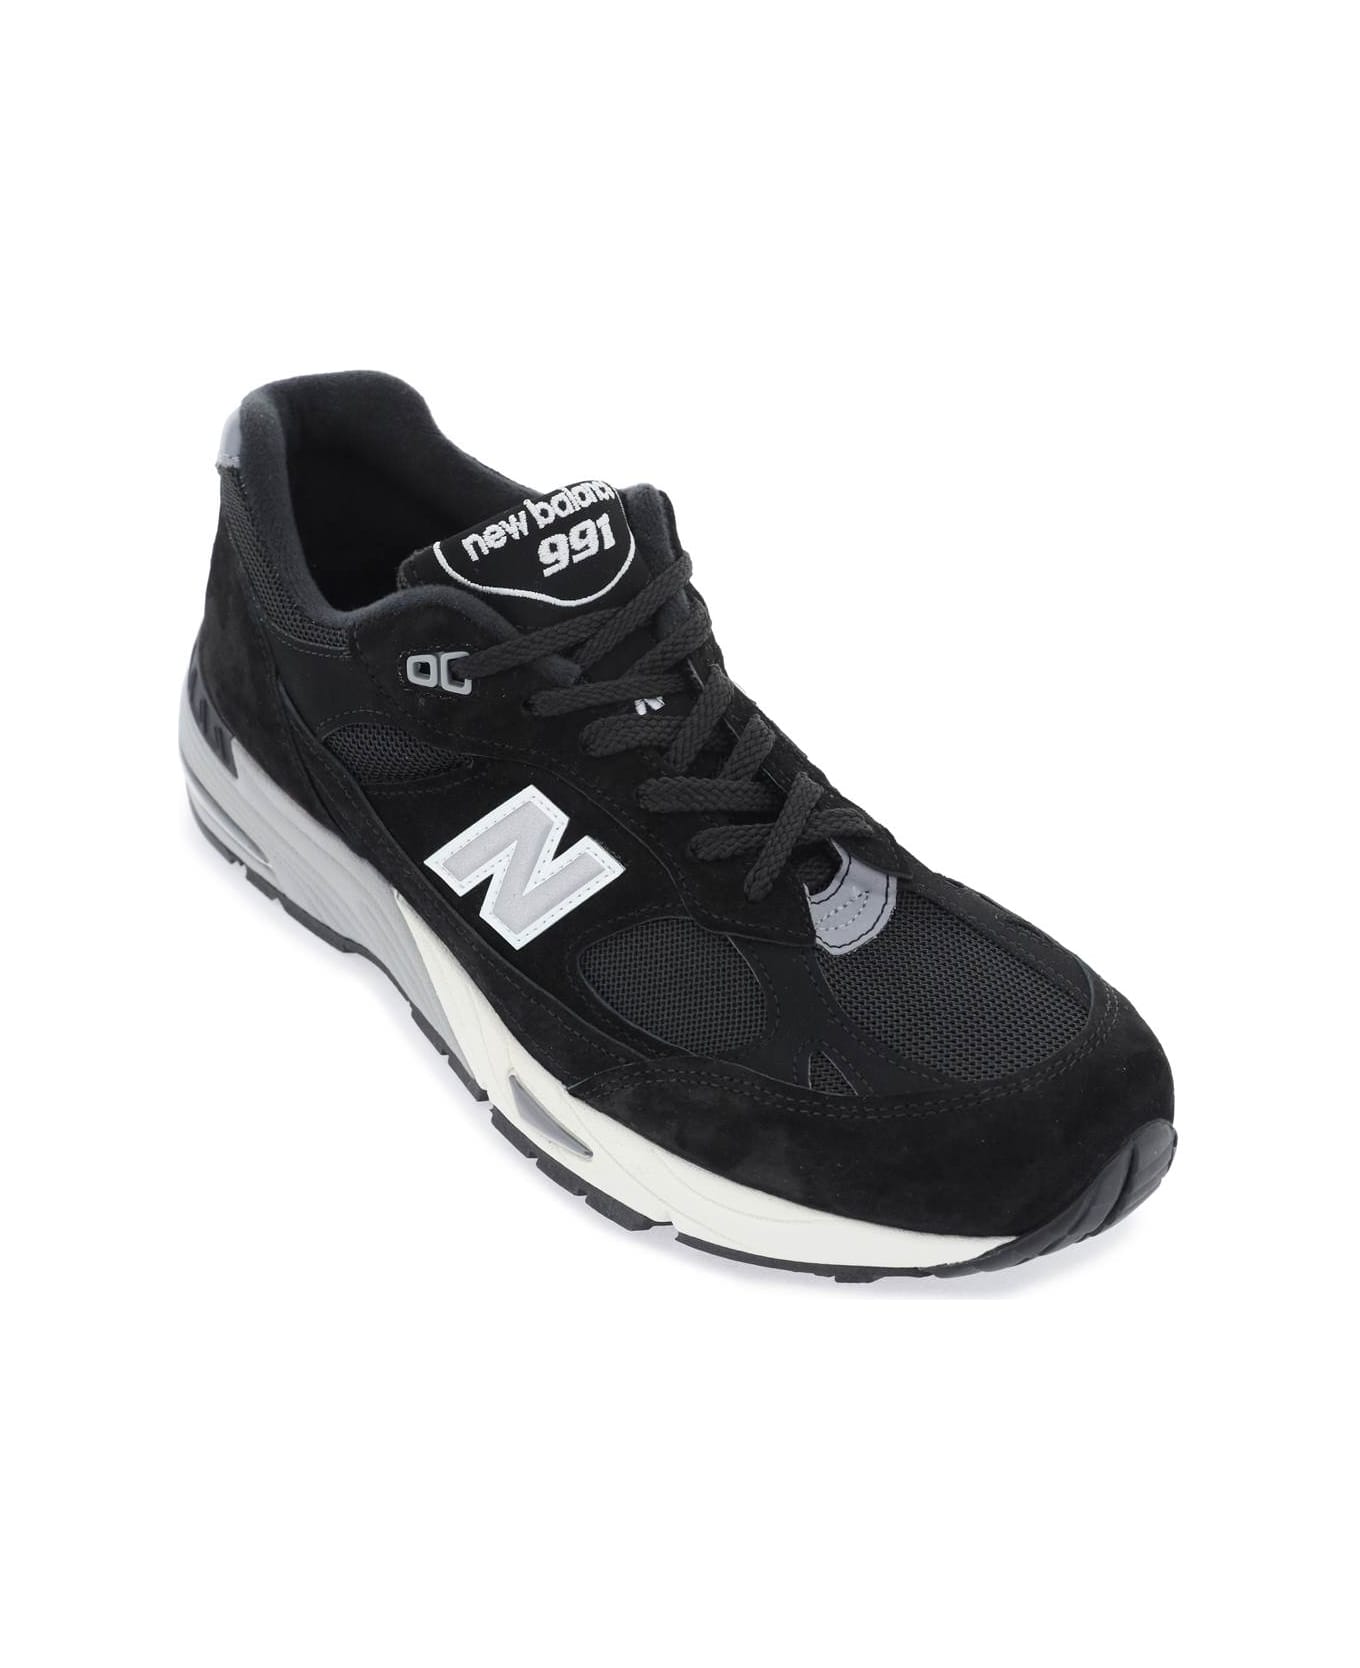 New Balance Made In Uk 991 Sneakers - BLACK